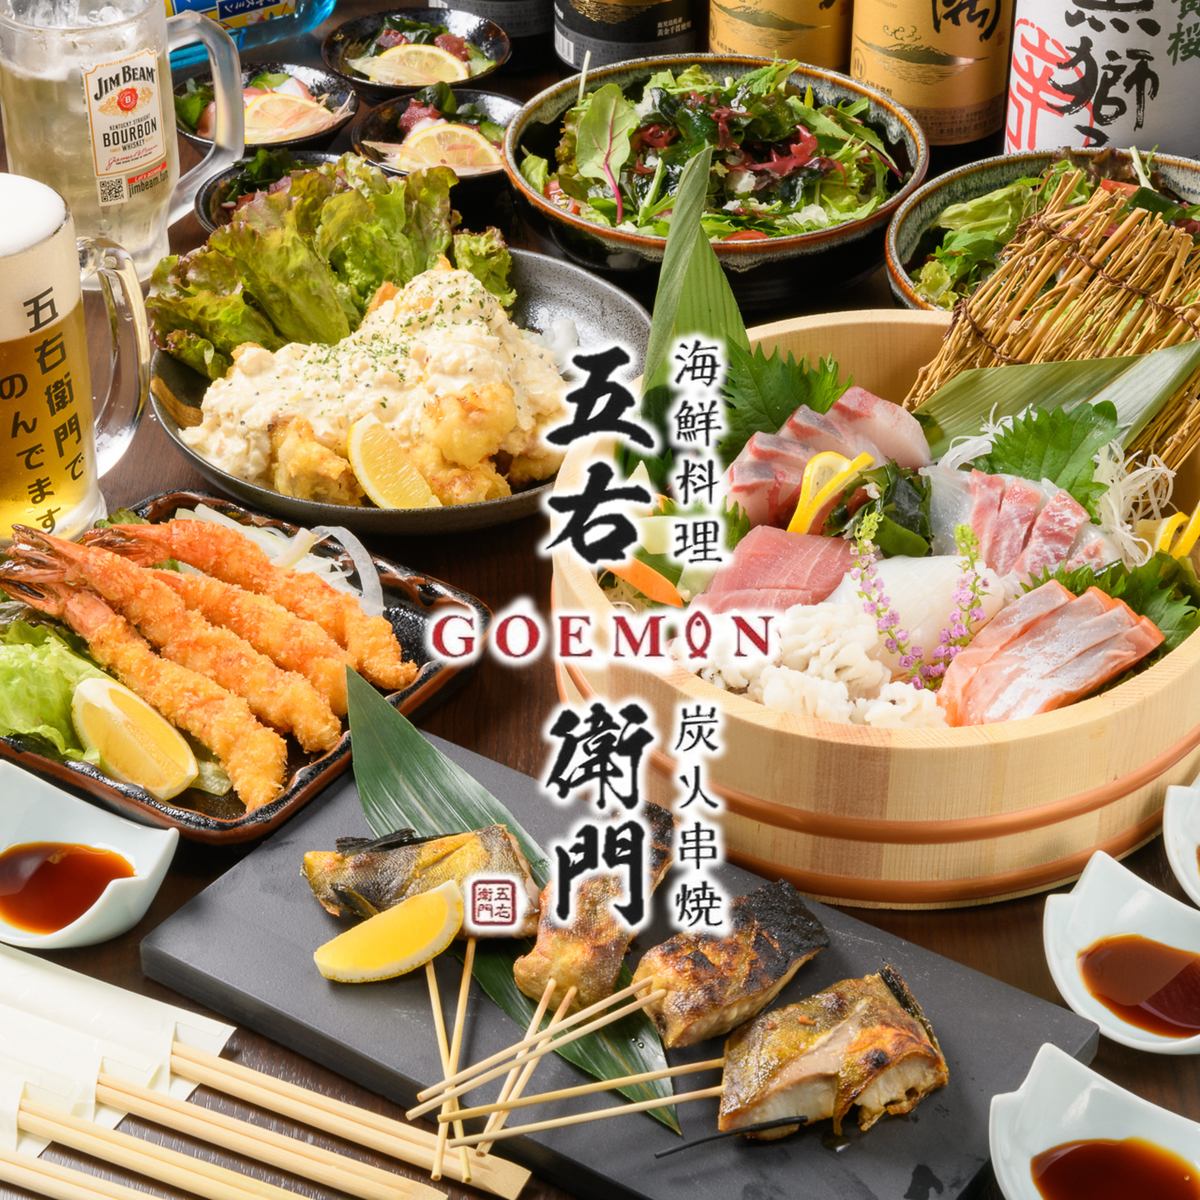 Enjoy fresh seafood and charcoal-grilled skewers to your heart's content in a relaxing Japanese dining space.